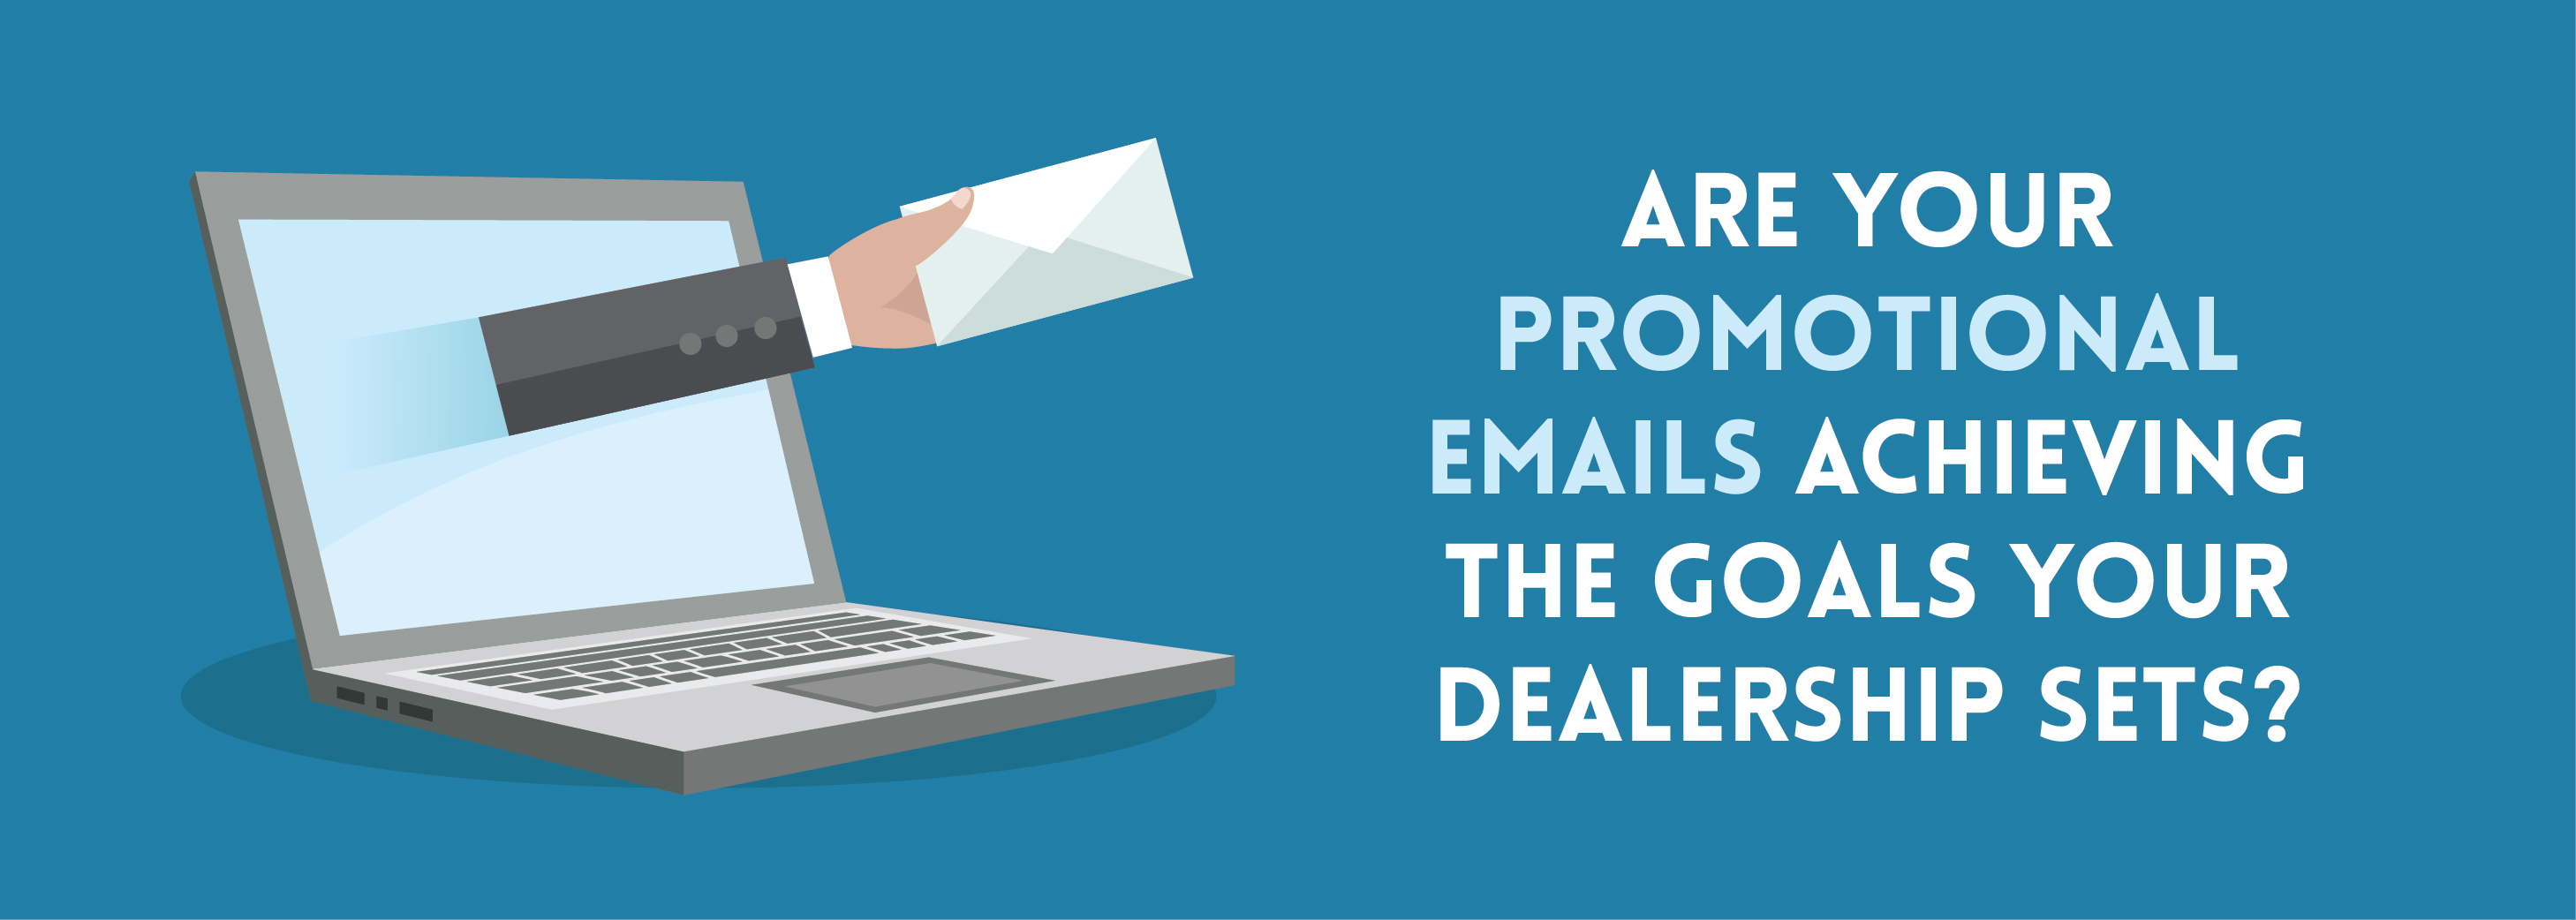 Are Your Promotional Emails Achieving The Goals Your Dealership Sets-01